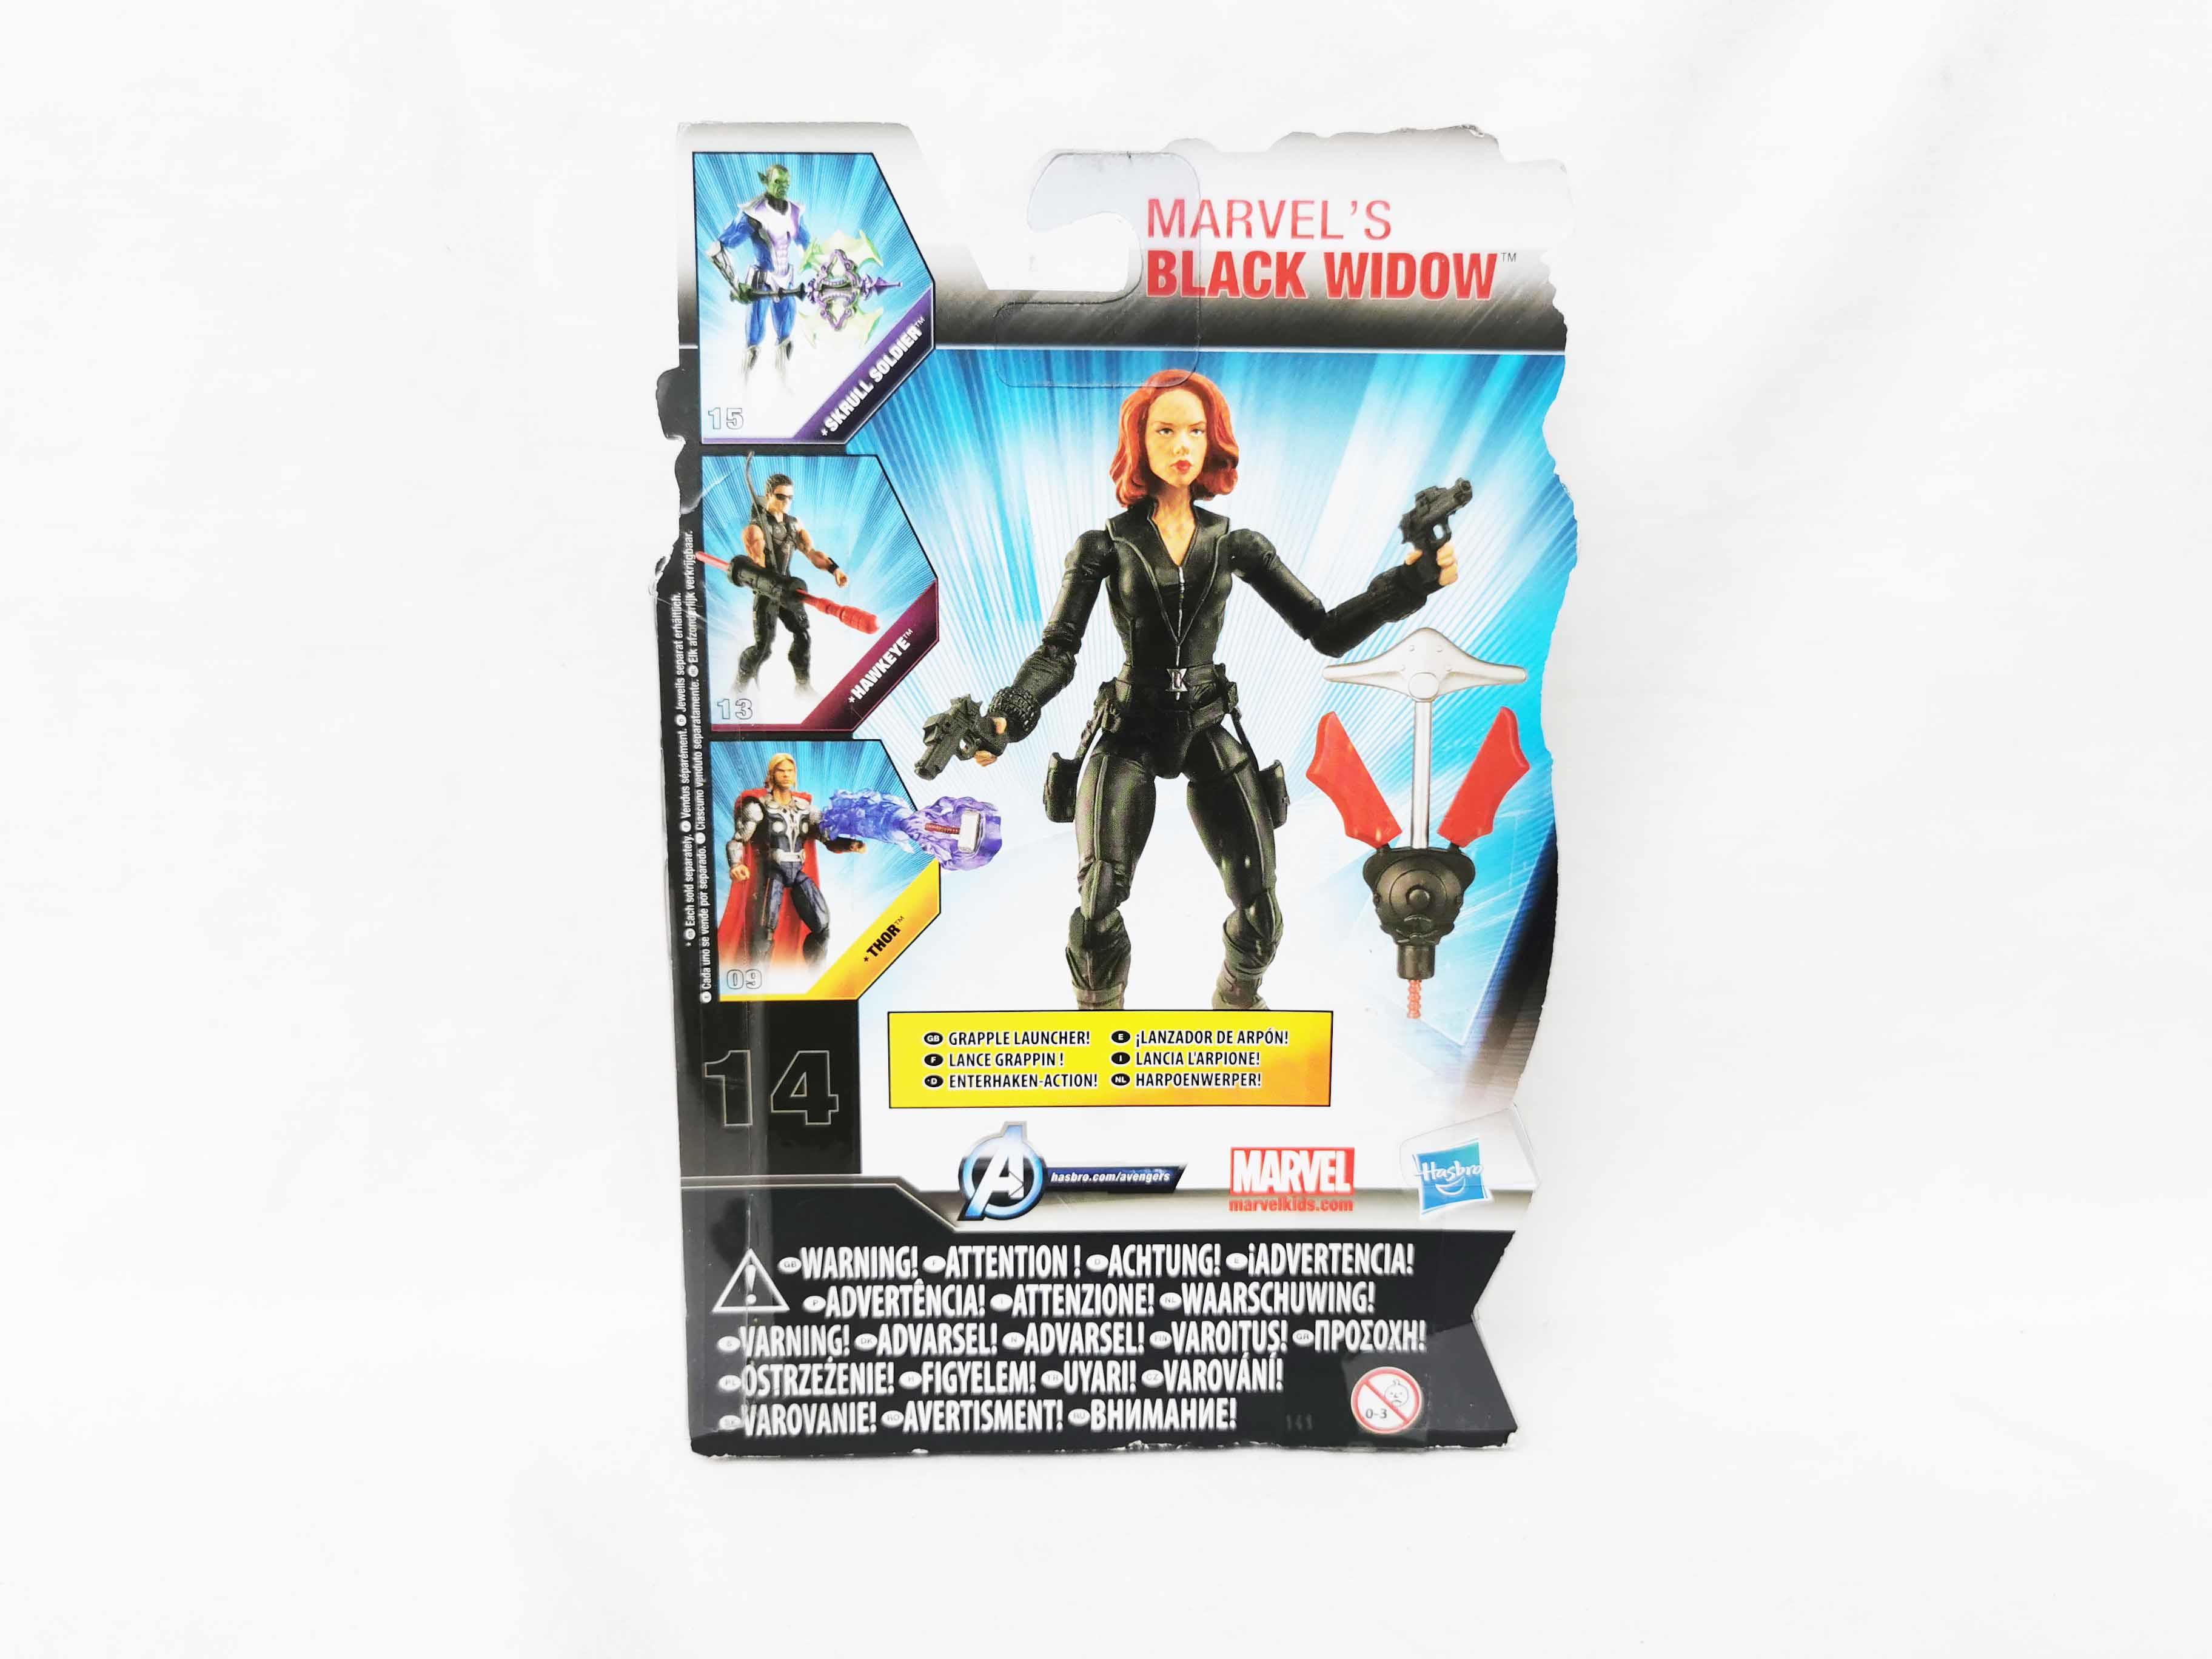 Black Widow Marvel Universe Avengers Assemble Carded Action Figure 3.75 scale Hasbro